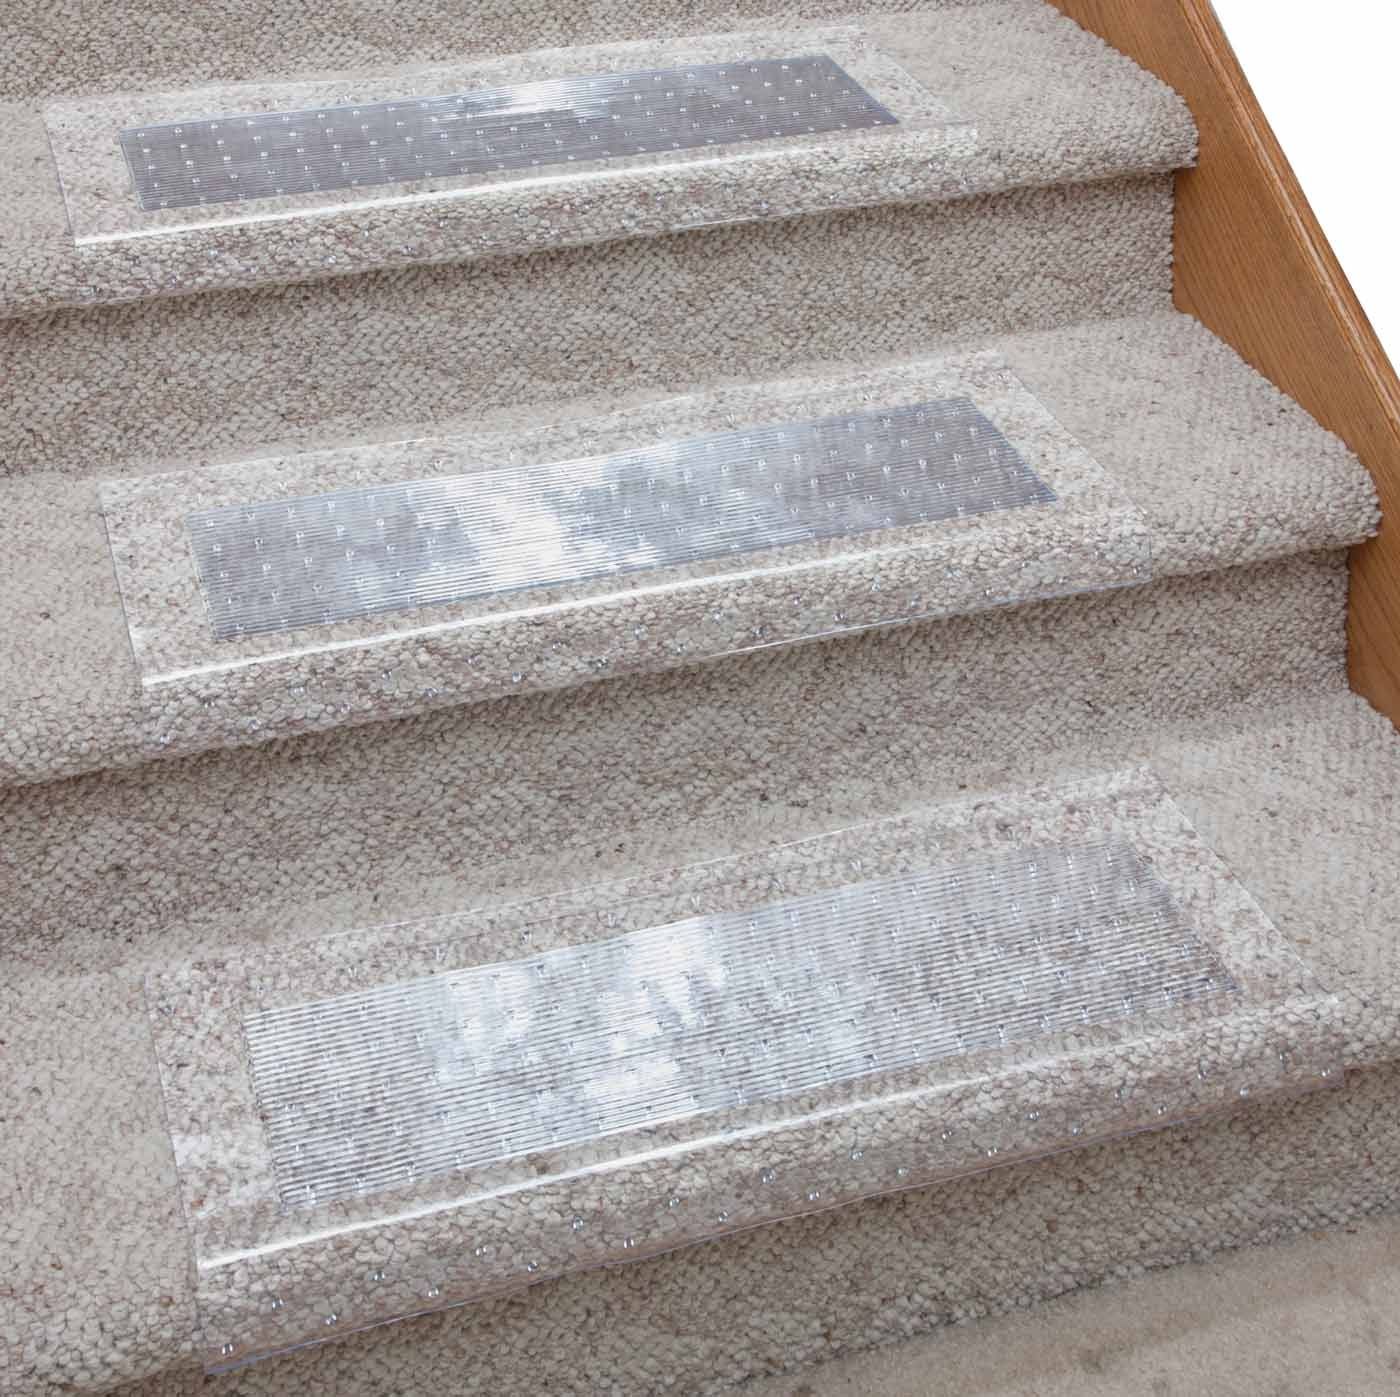 Theme Of The Daycarpet Protector Mats For Stairs Stair Carpet Intended For Carpet Protector Mats For Stairs (View 1 of 20)